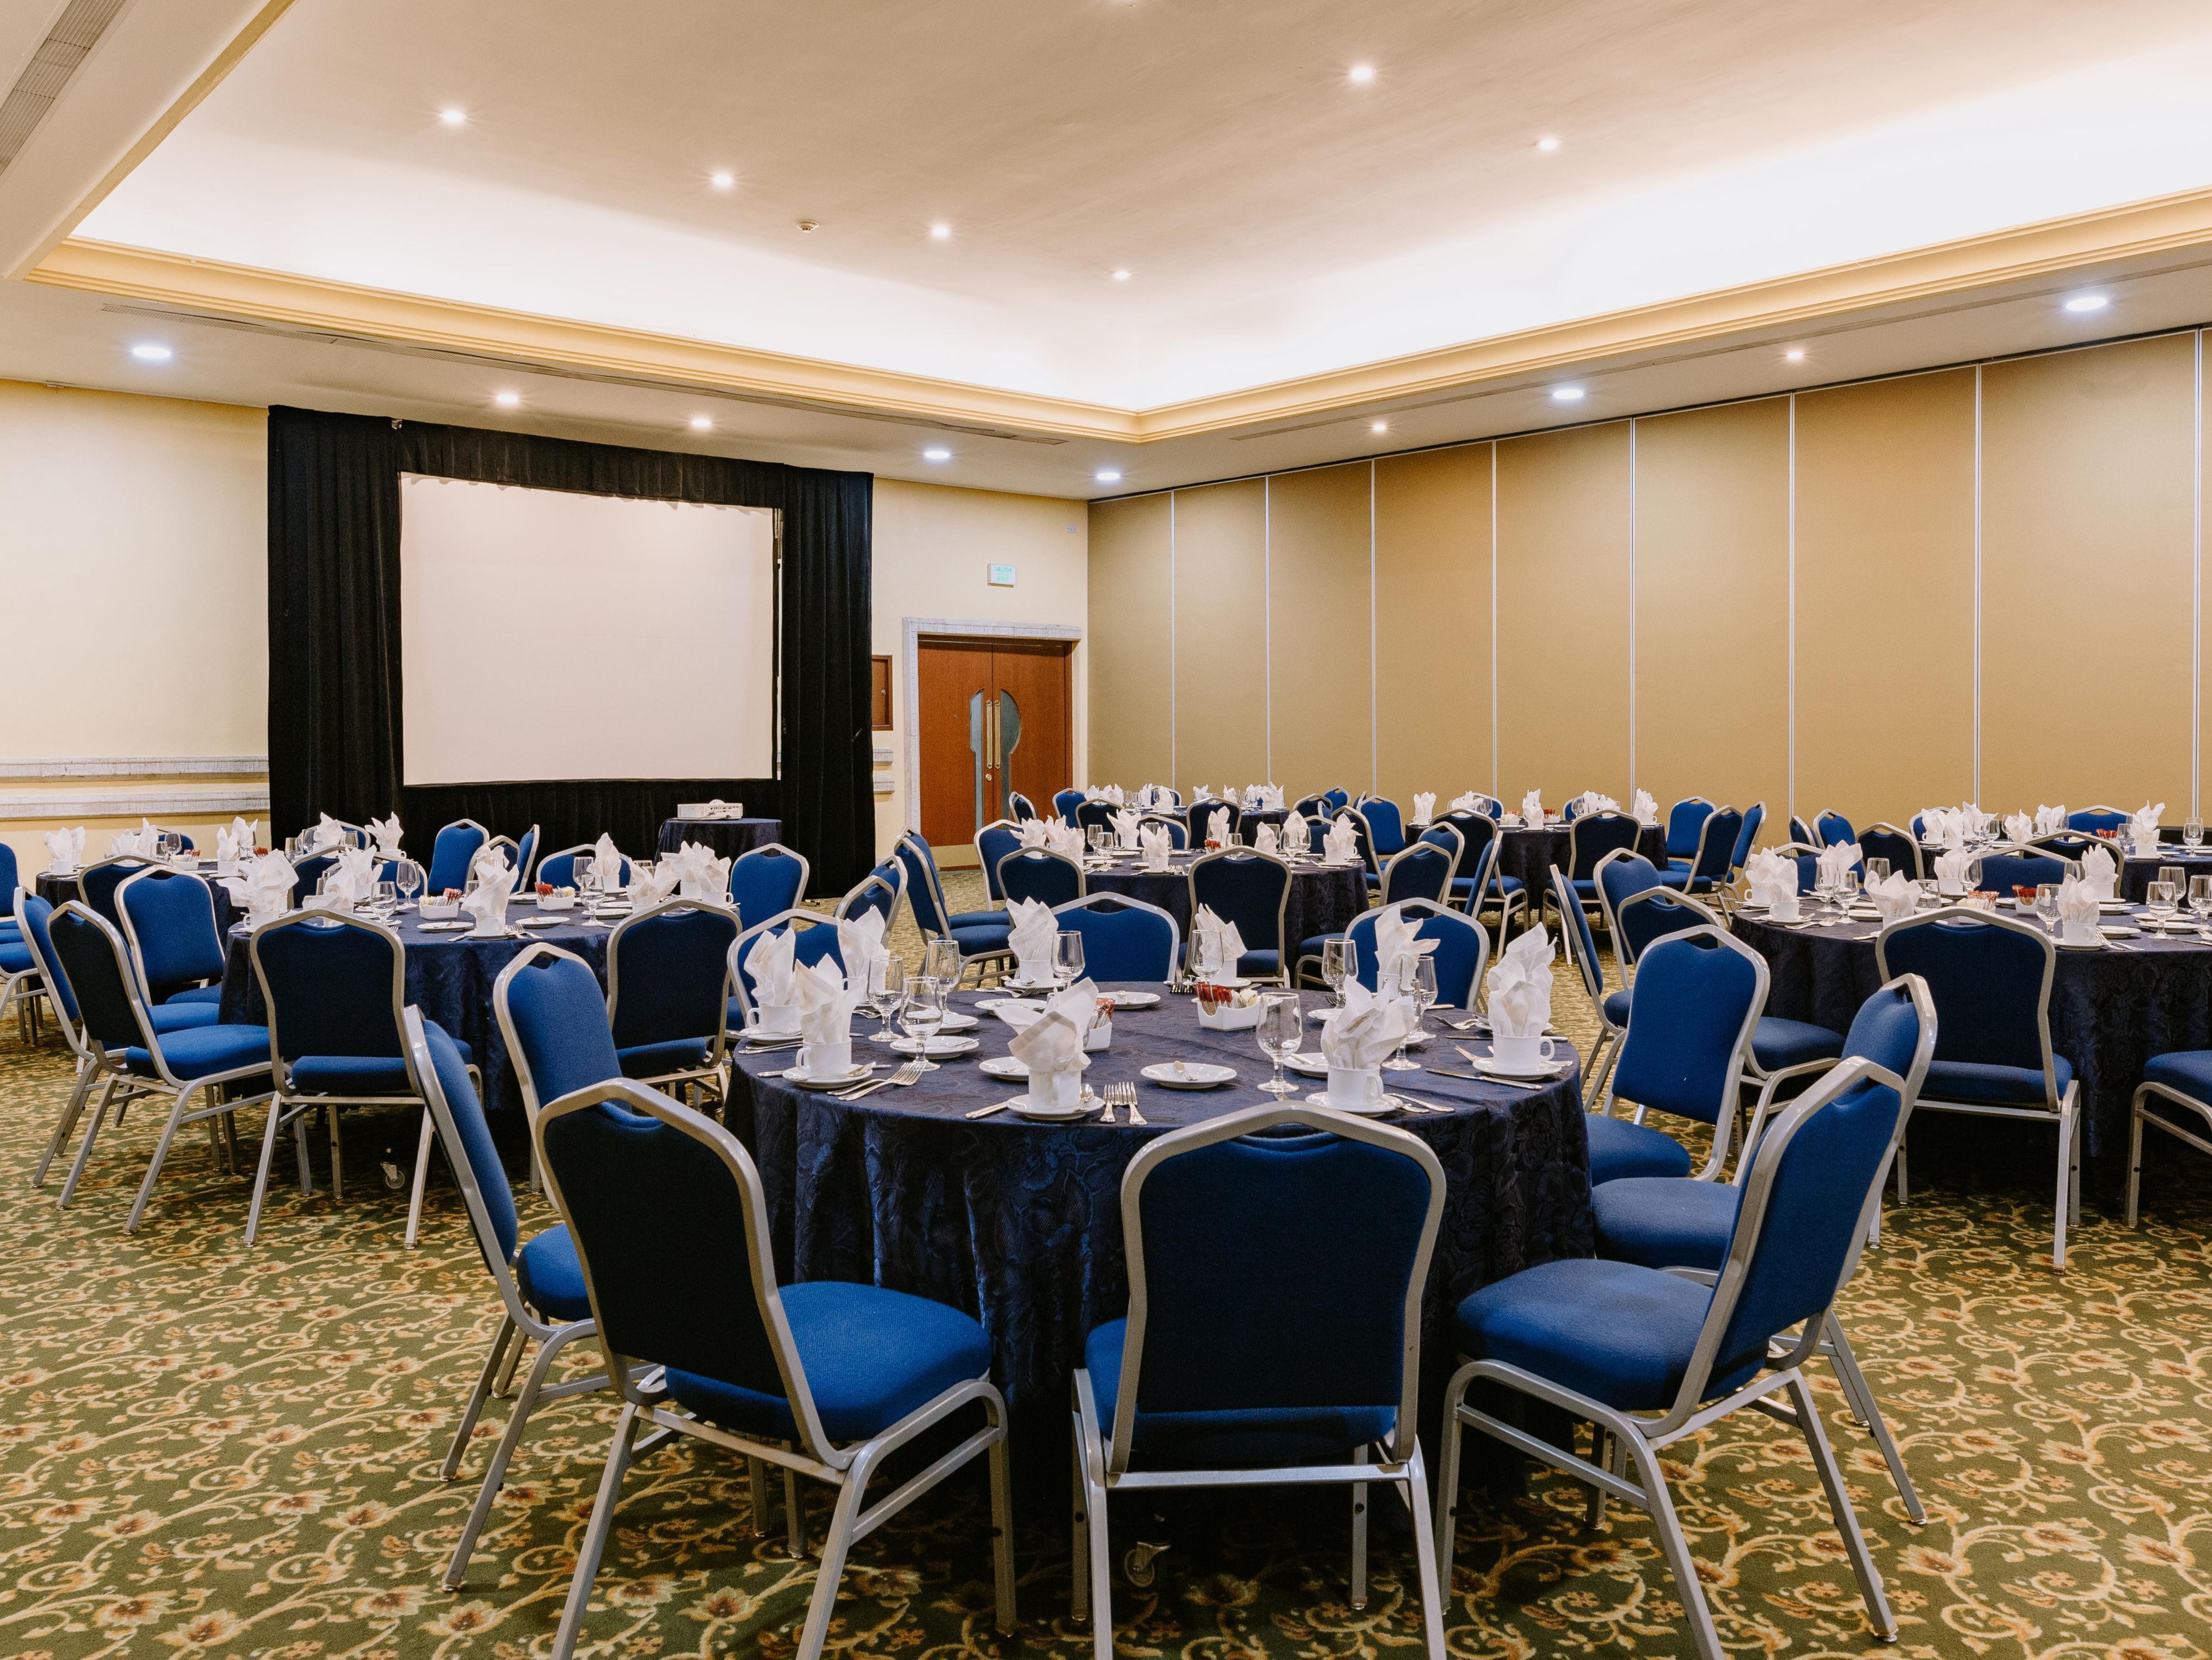 Whether you're hosting an important business meeting or corporate event or planning a once-in-a-lifetime celebration, we have the perfect meeting space for you. Our facilities can comfortably accommodate up to 700 guests in our auditorium, and all rooms are equipped with A/V technology. We also offer in-house catering options.